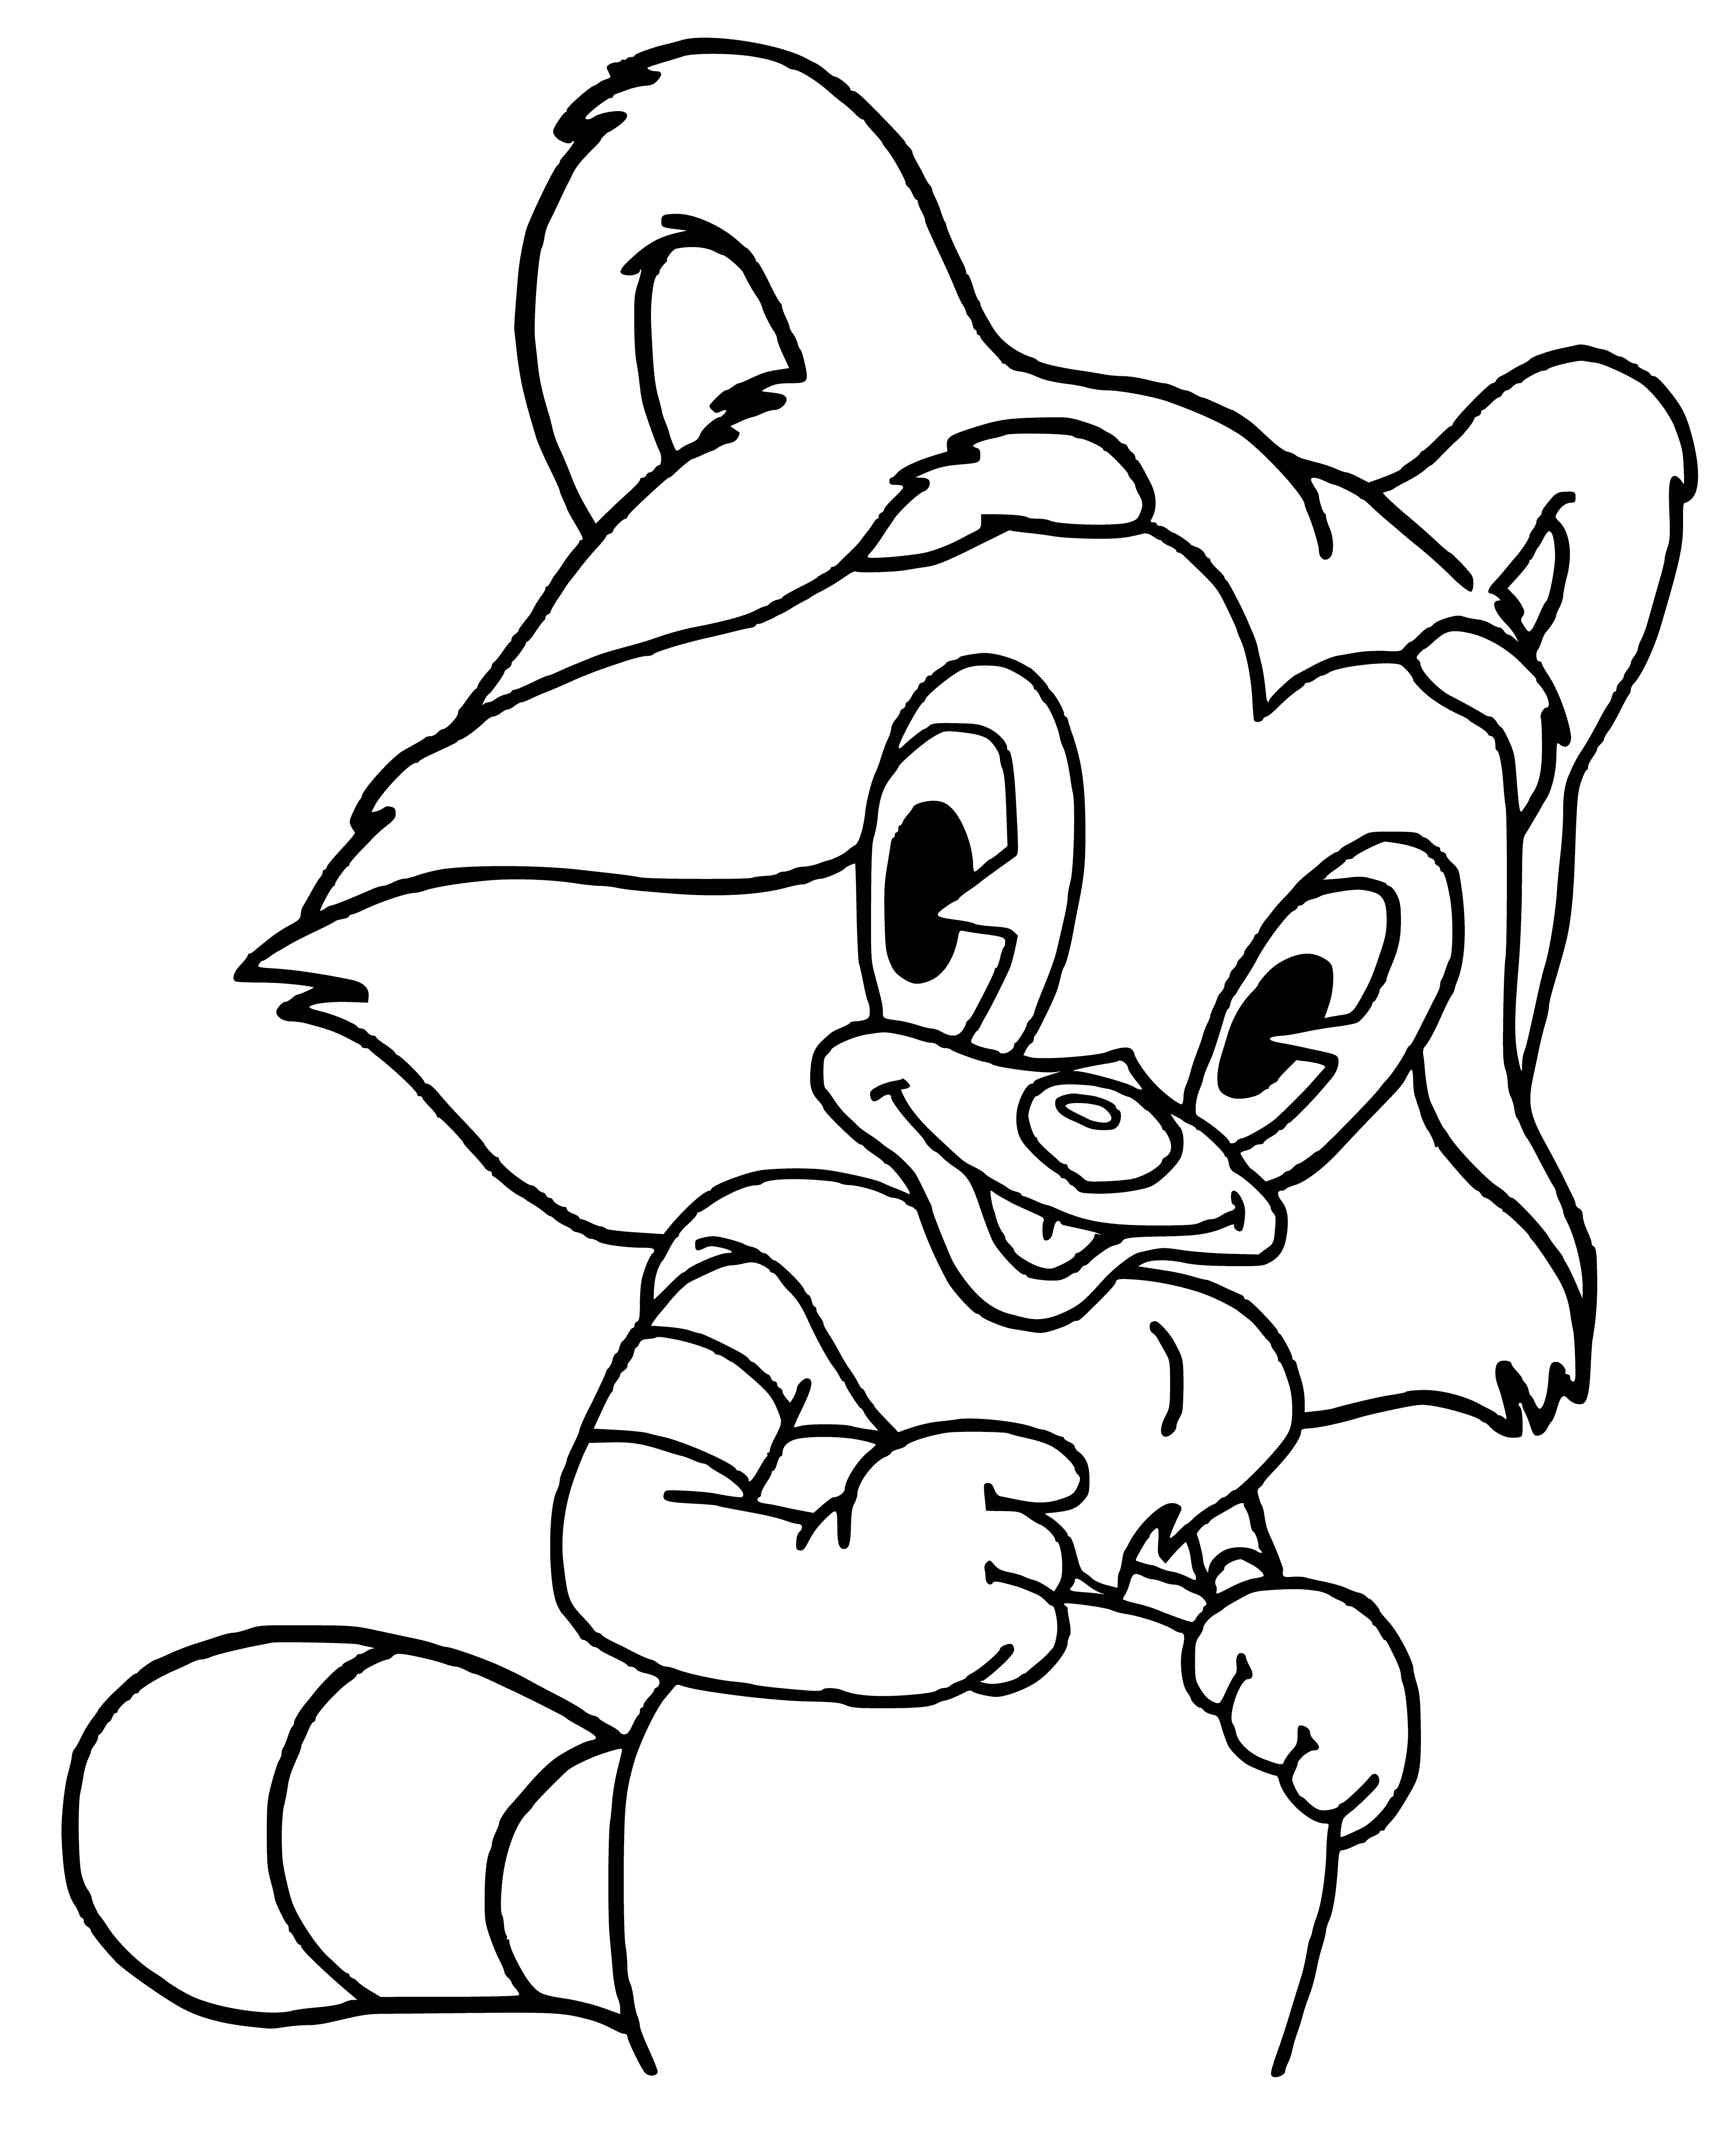 coloring page: A small, brown & white raccoon is chew.ing on a green leaf, with a bushy tail & black mask around its eyes. #ForestLife